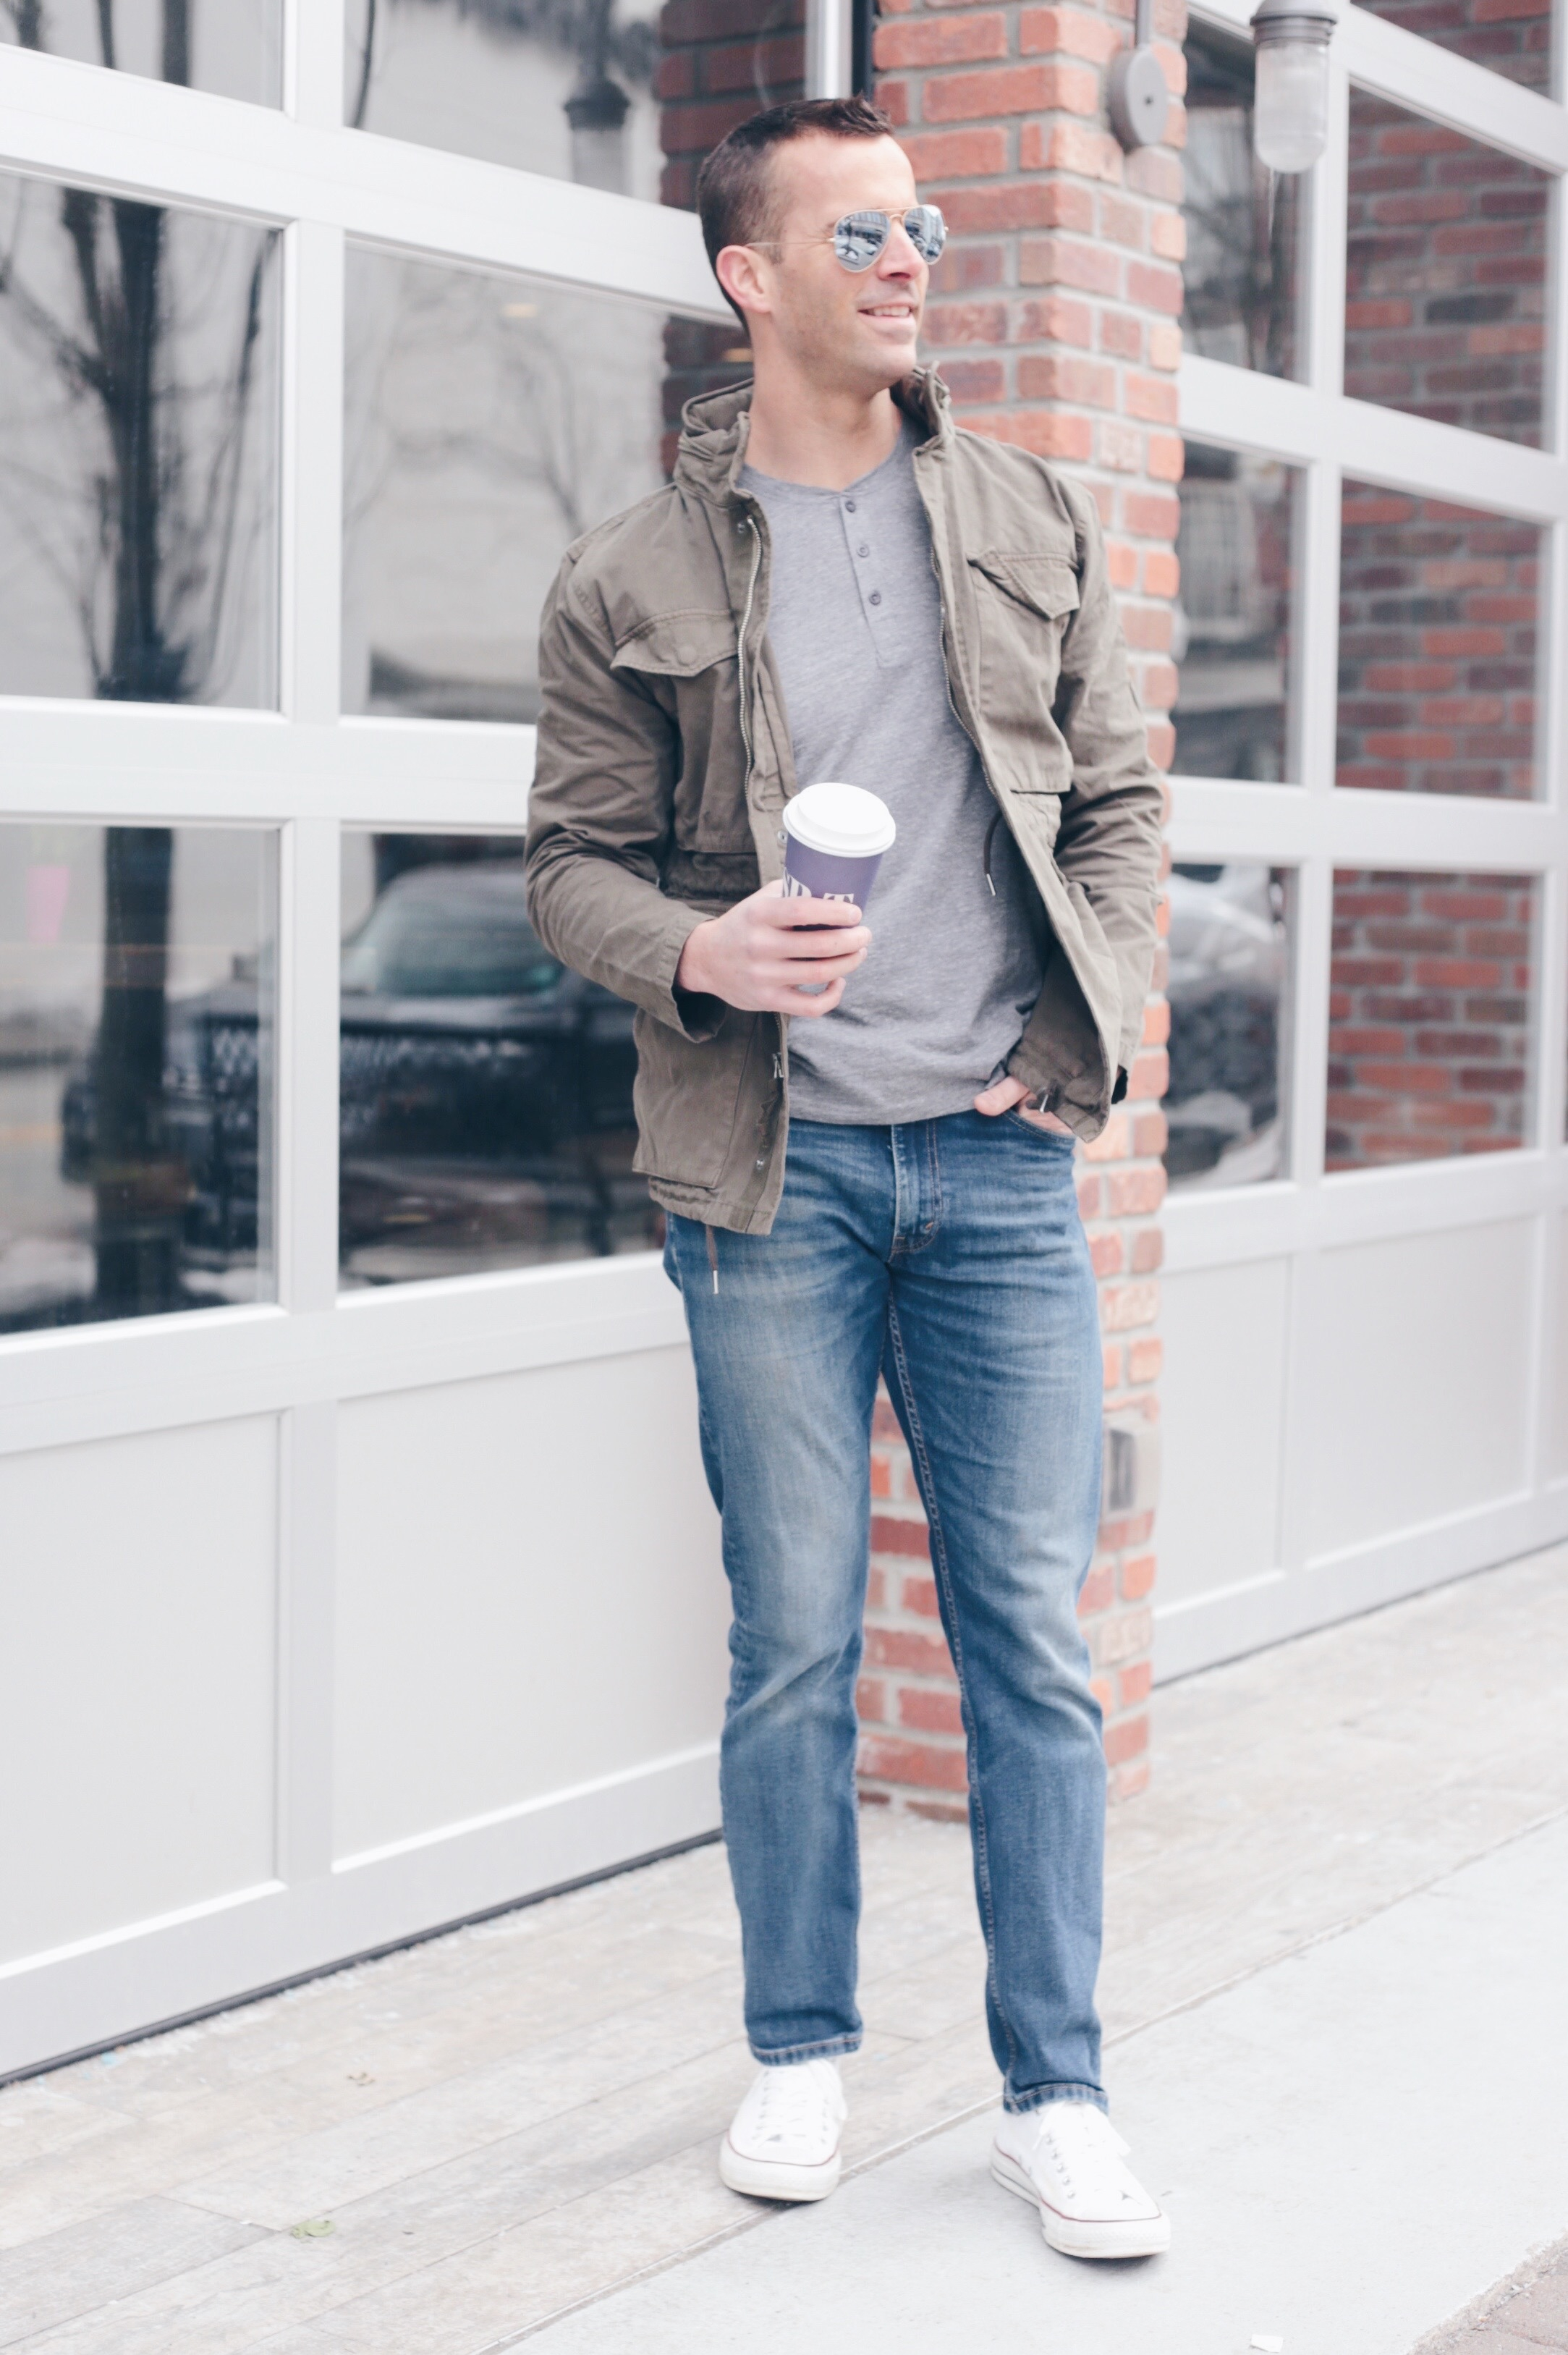  men's spring capsule wardrobe 2019 - men's everyday style outfit with jeans